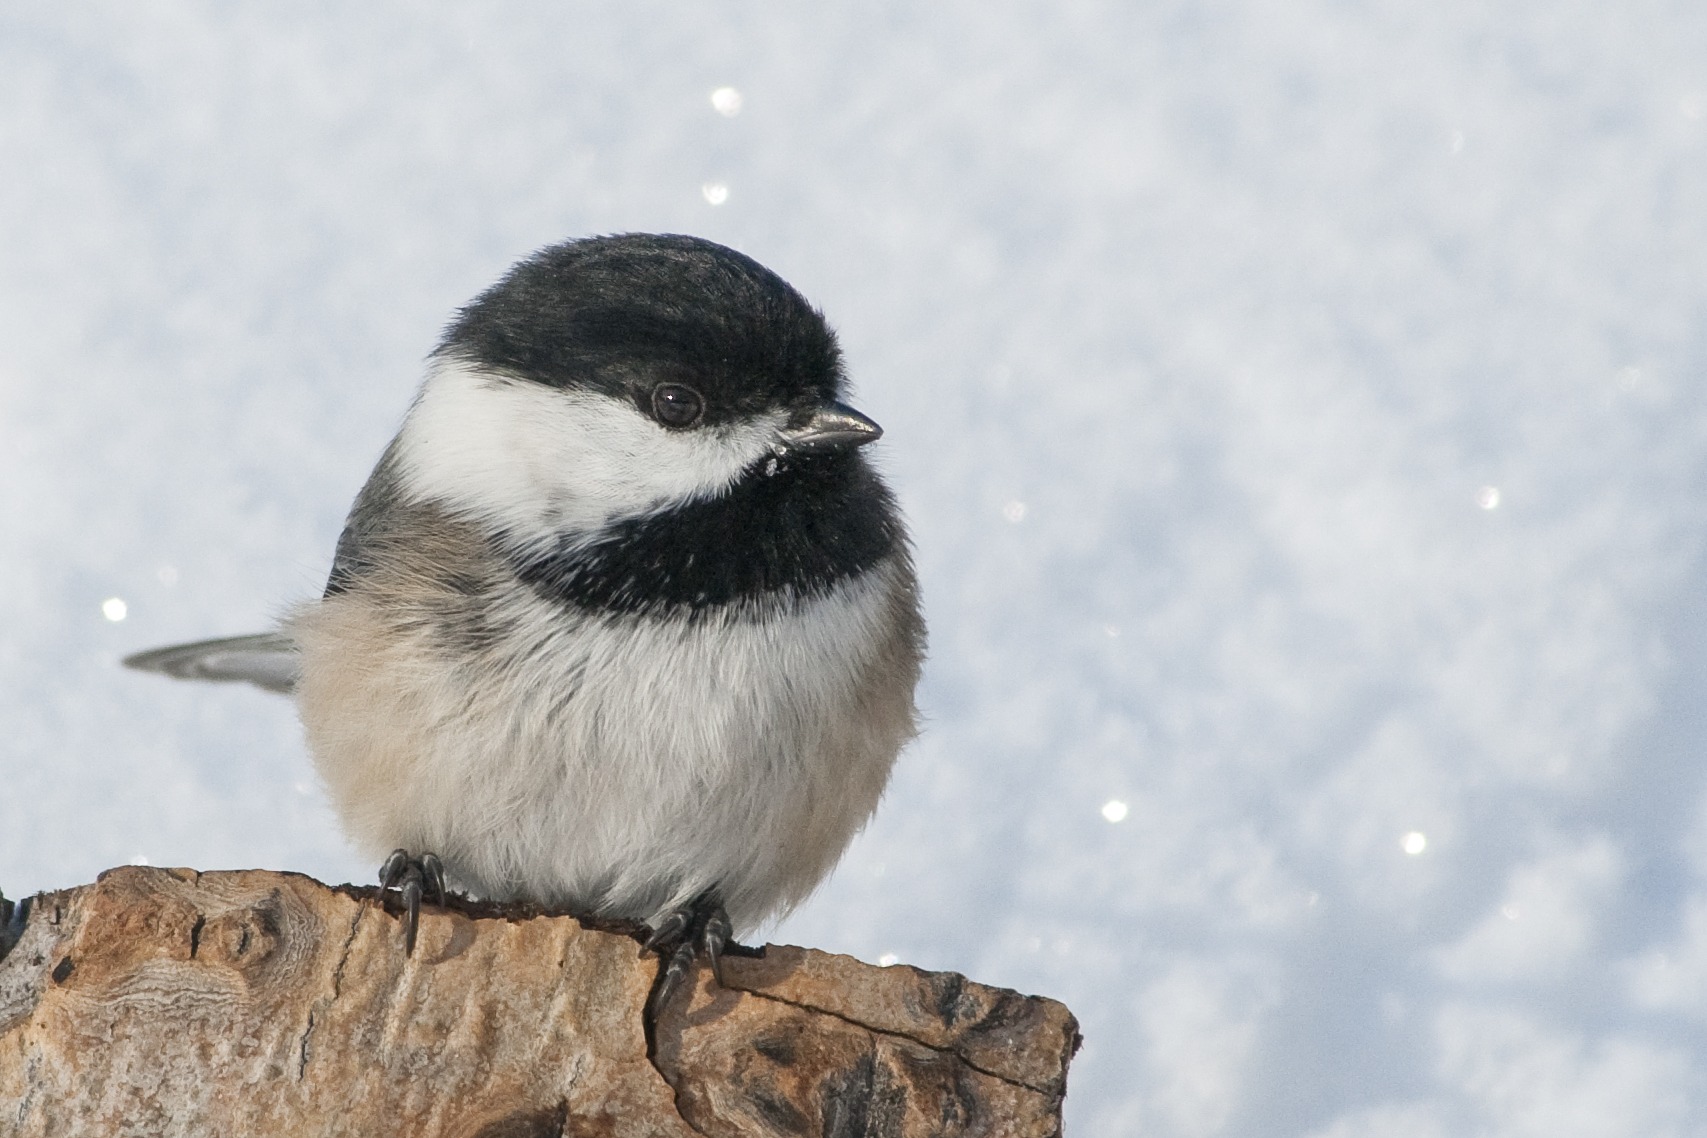 A cute Black-capped Chickadee perched in front of a wall of shimmering snow